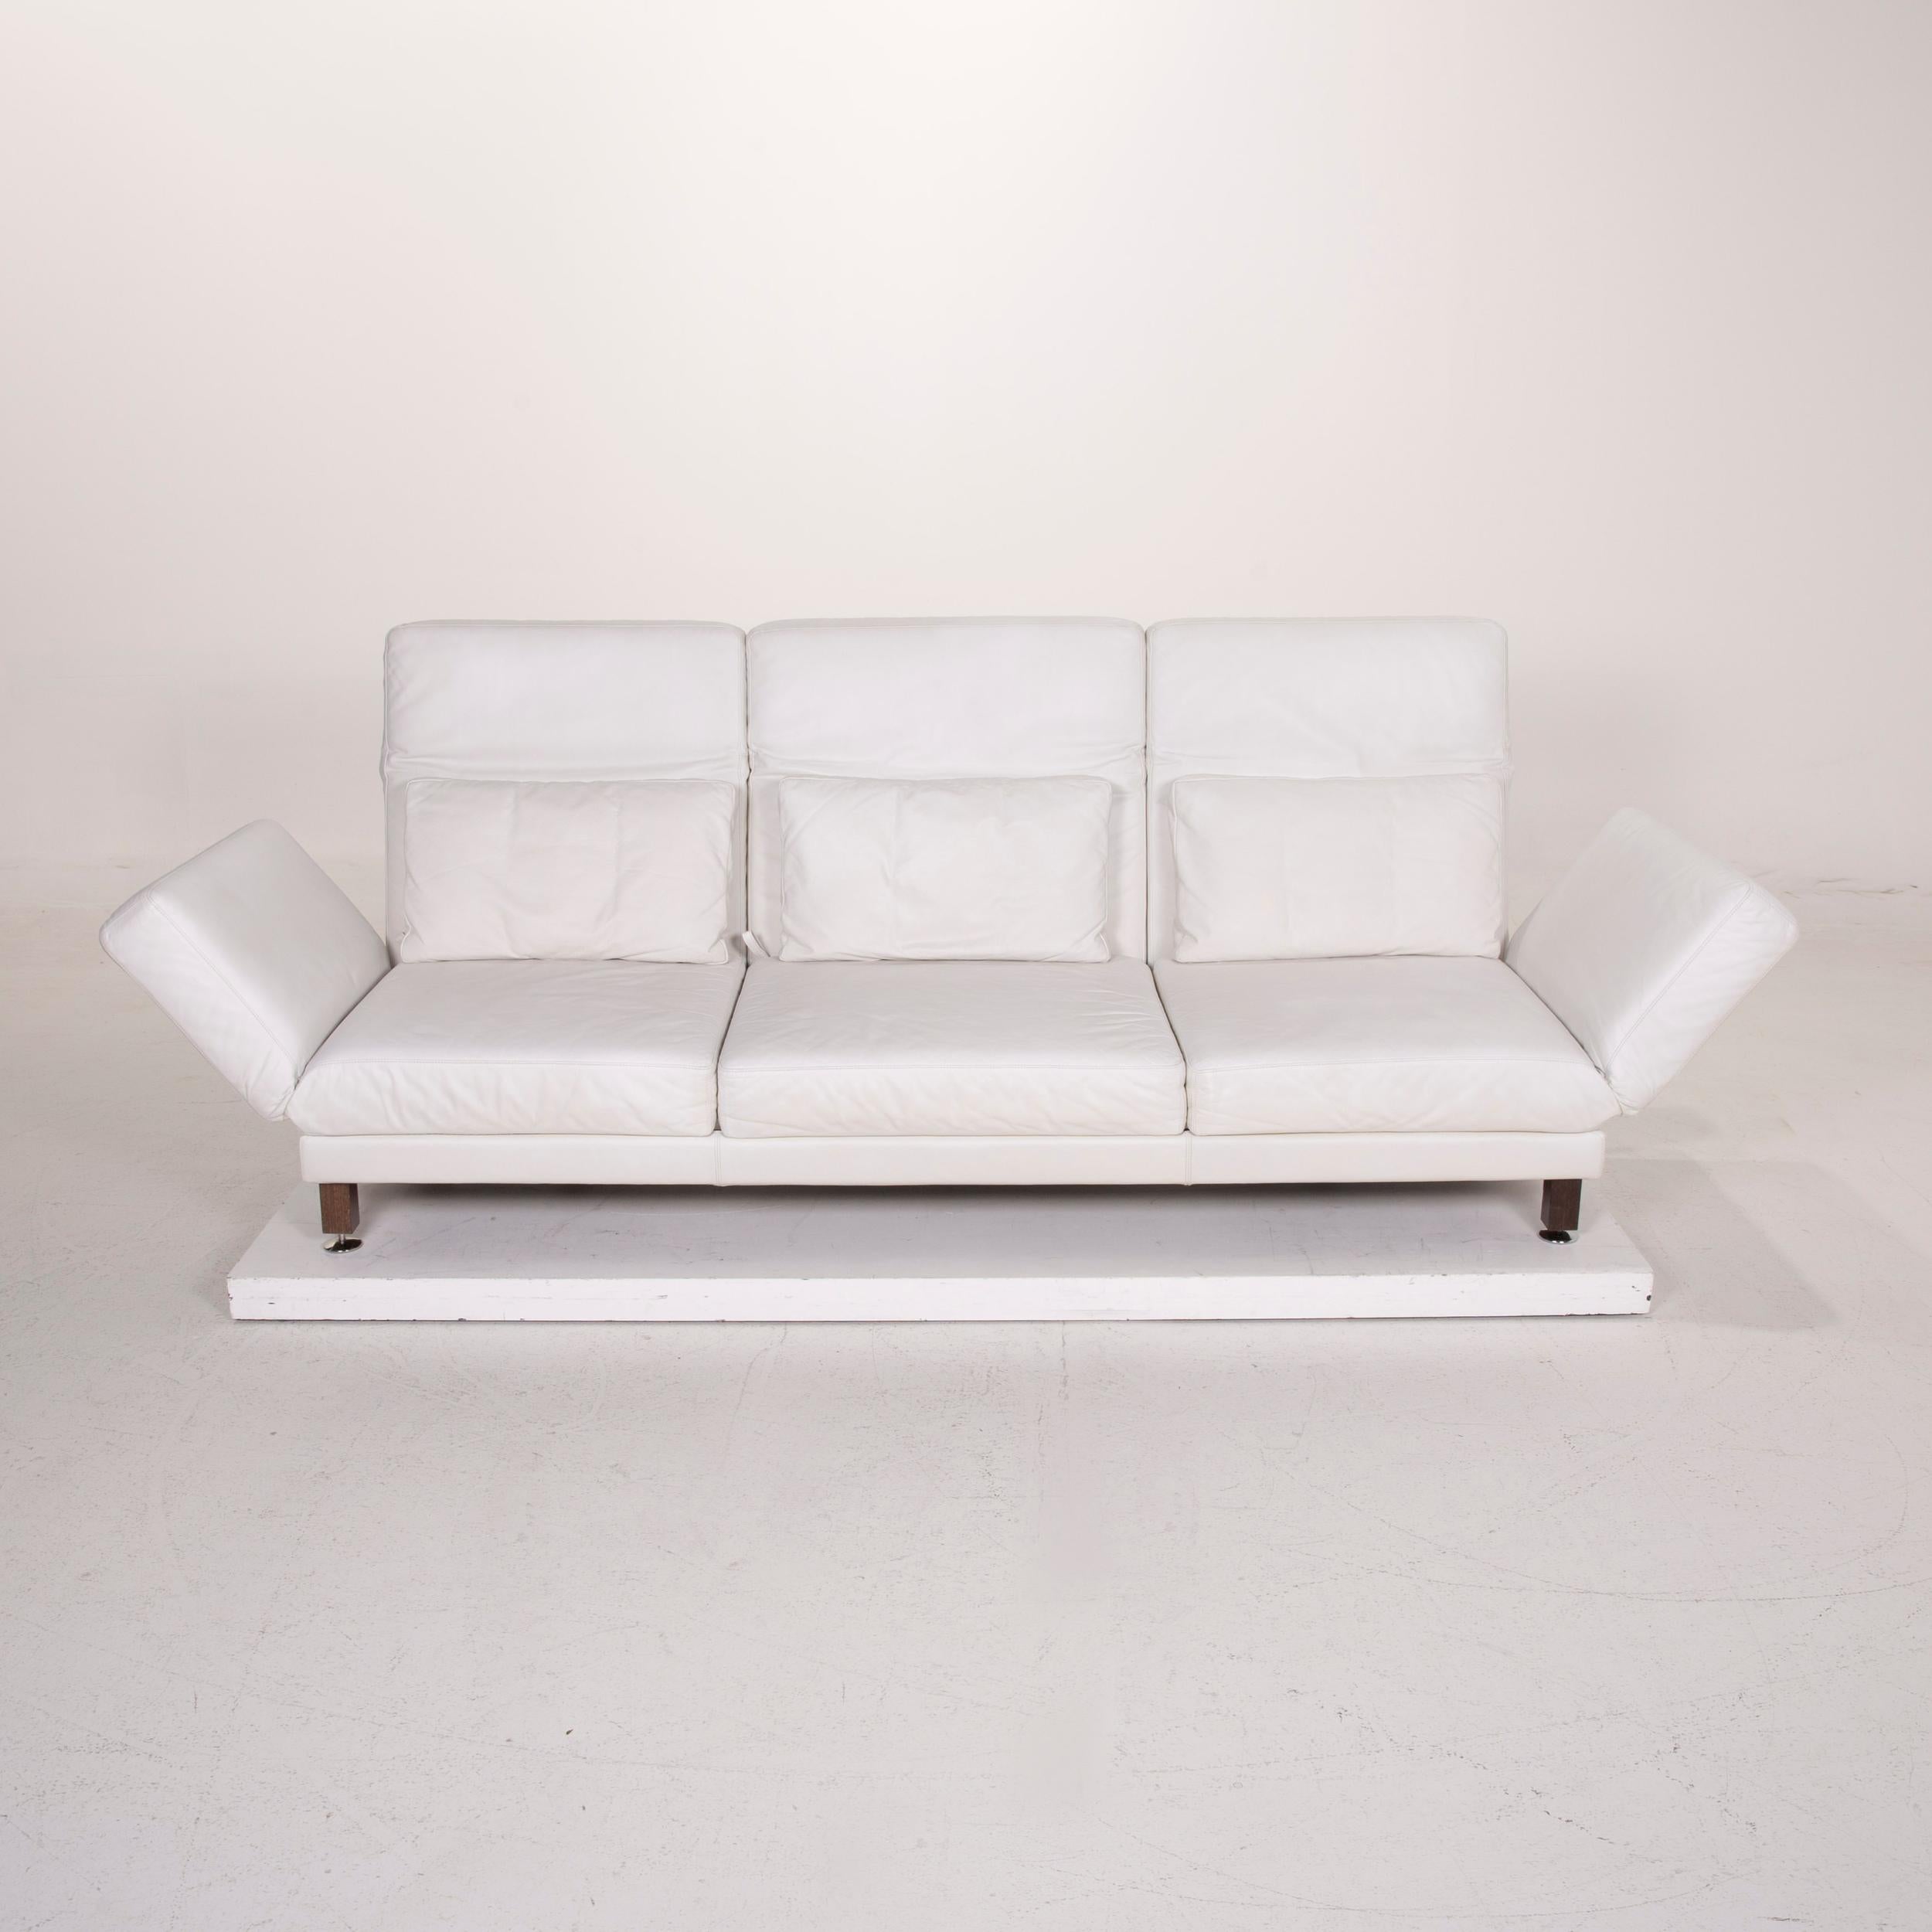 Brühl & Sippold Moule Leather Sofa White Three-Seat Relaxation Function For Sale 4